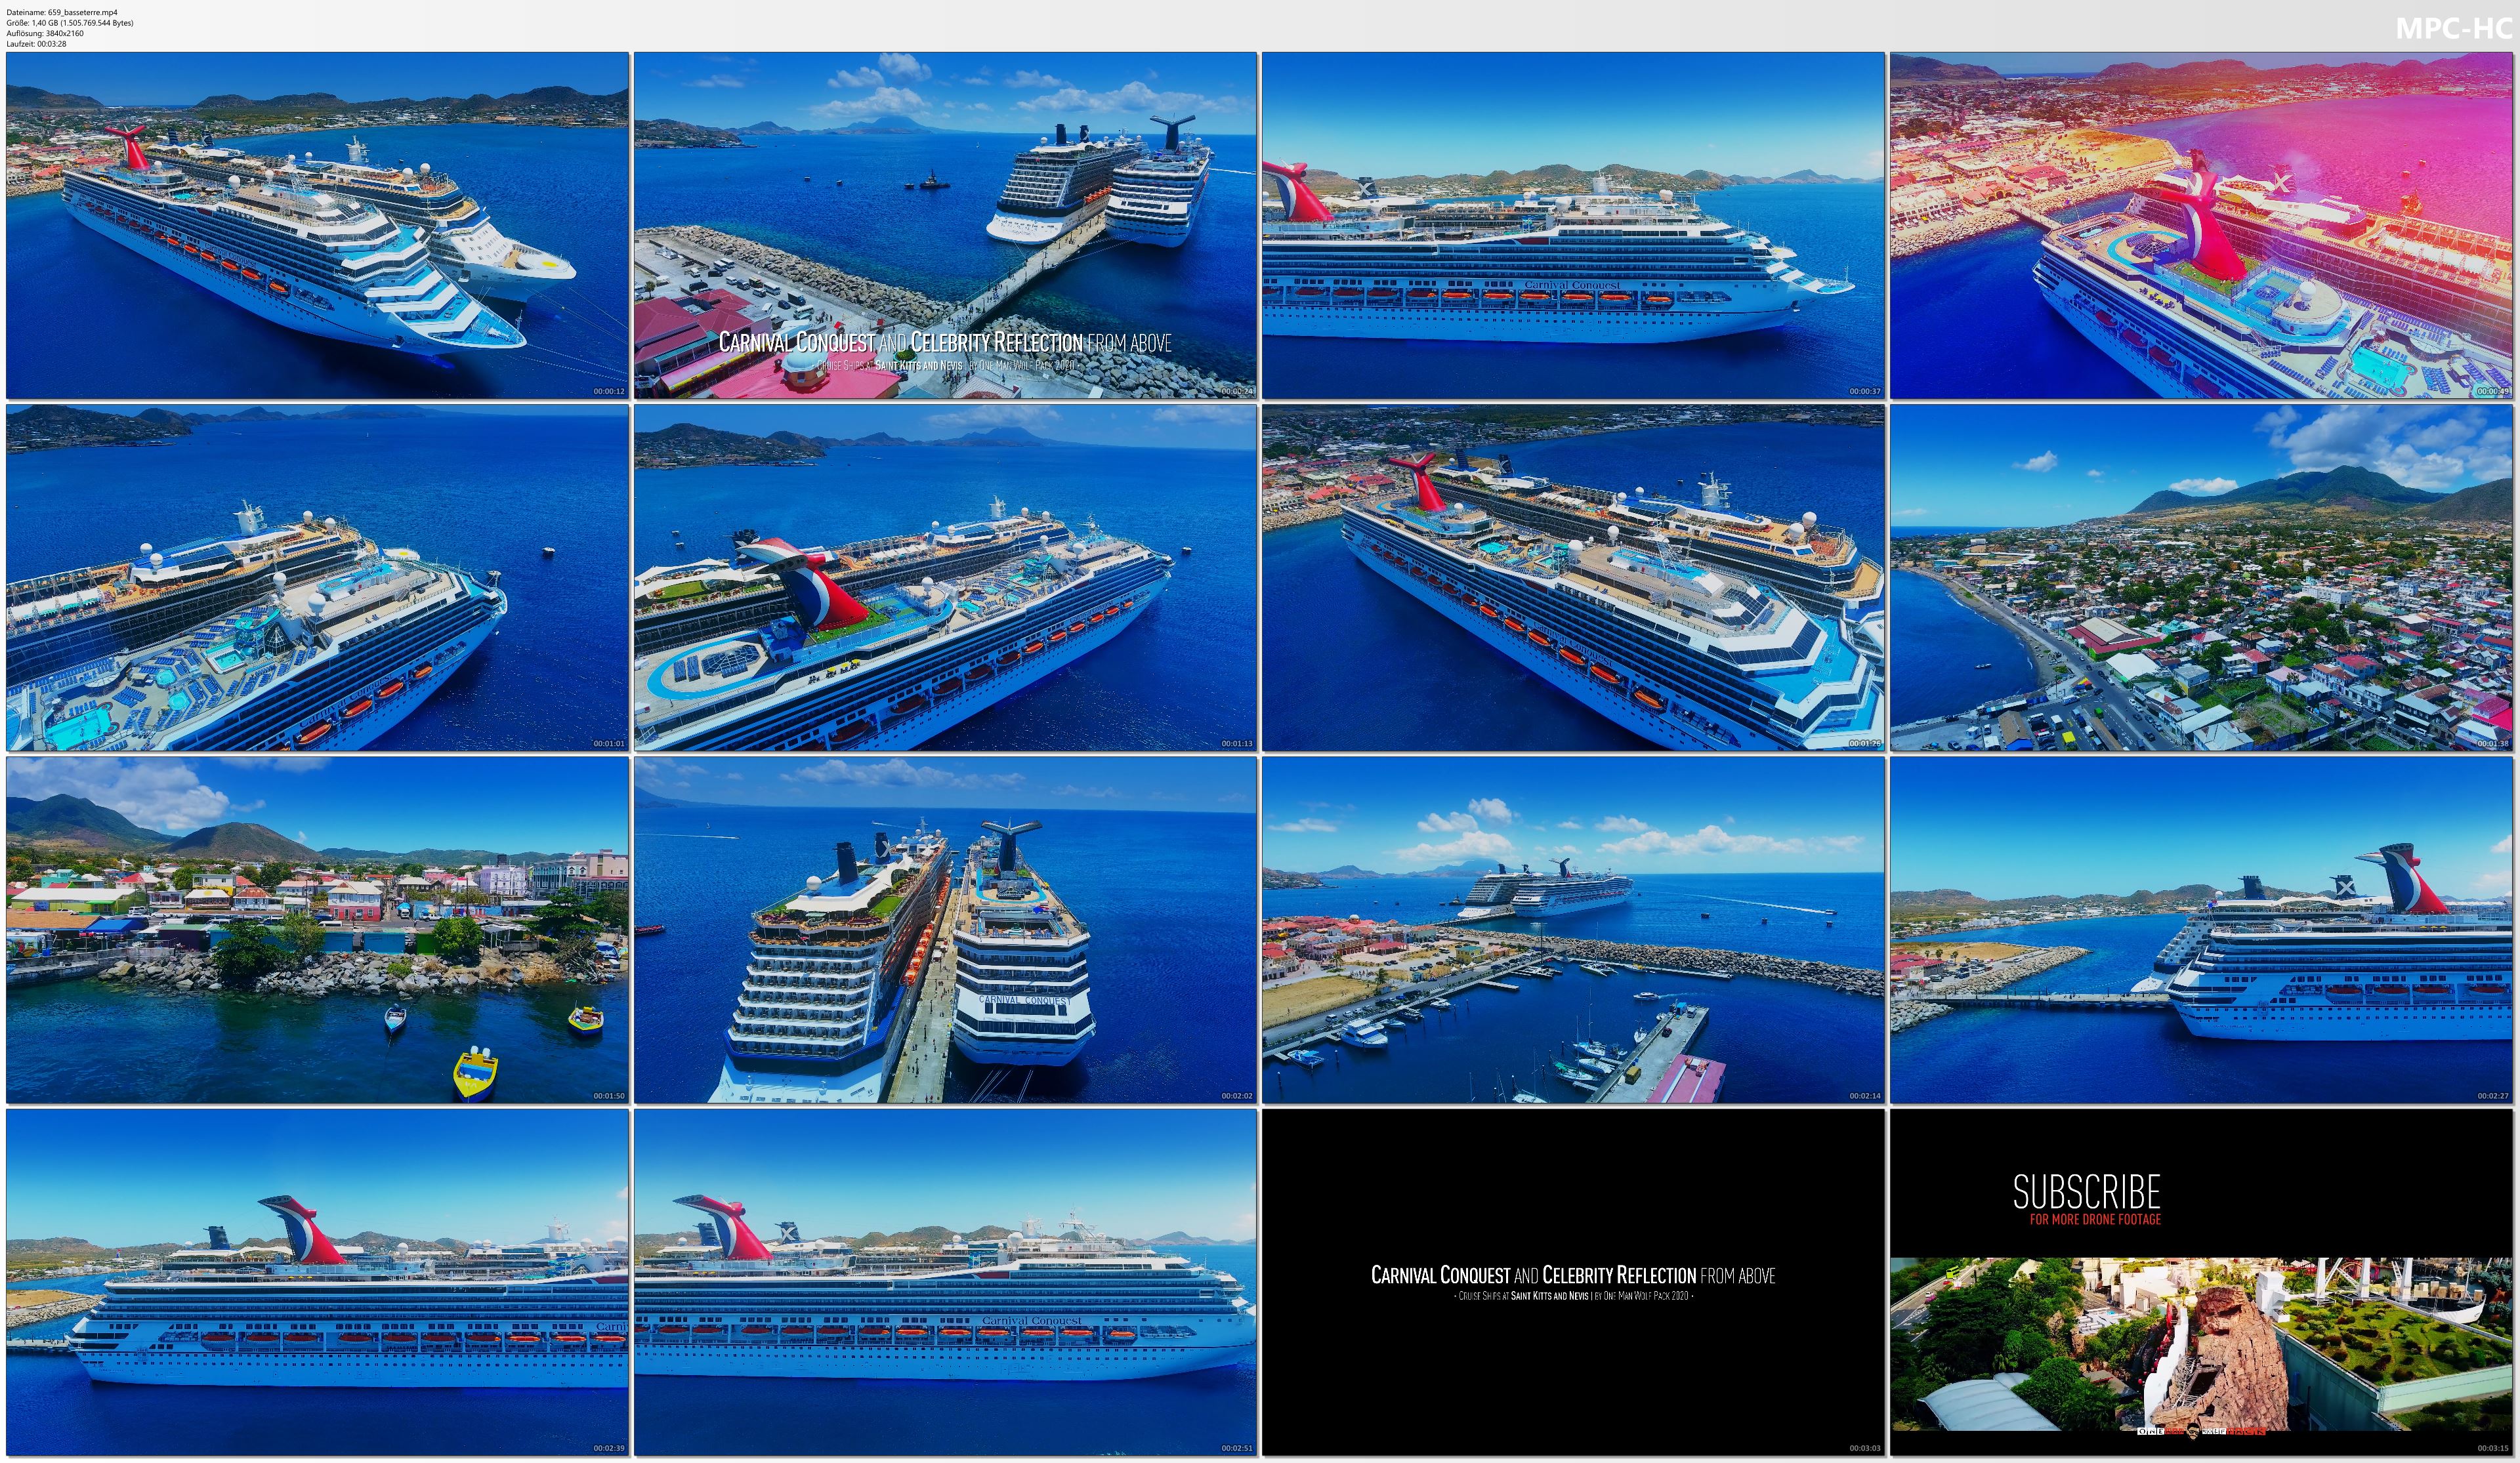 Drone Pictures from Video 【4K】CRUISE SHIPS from Above | Carnival Conquest & Celebrity Reflection | St. Kitts Cinematic Aerial™